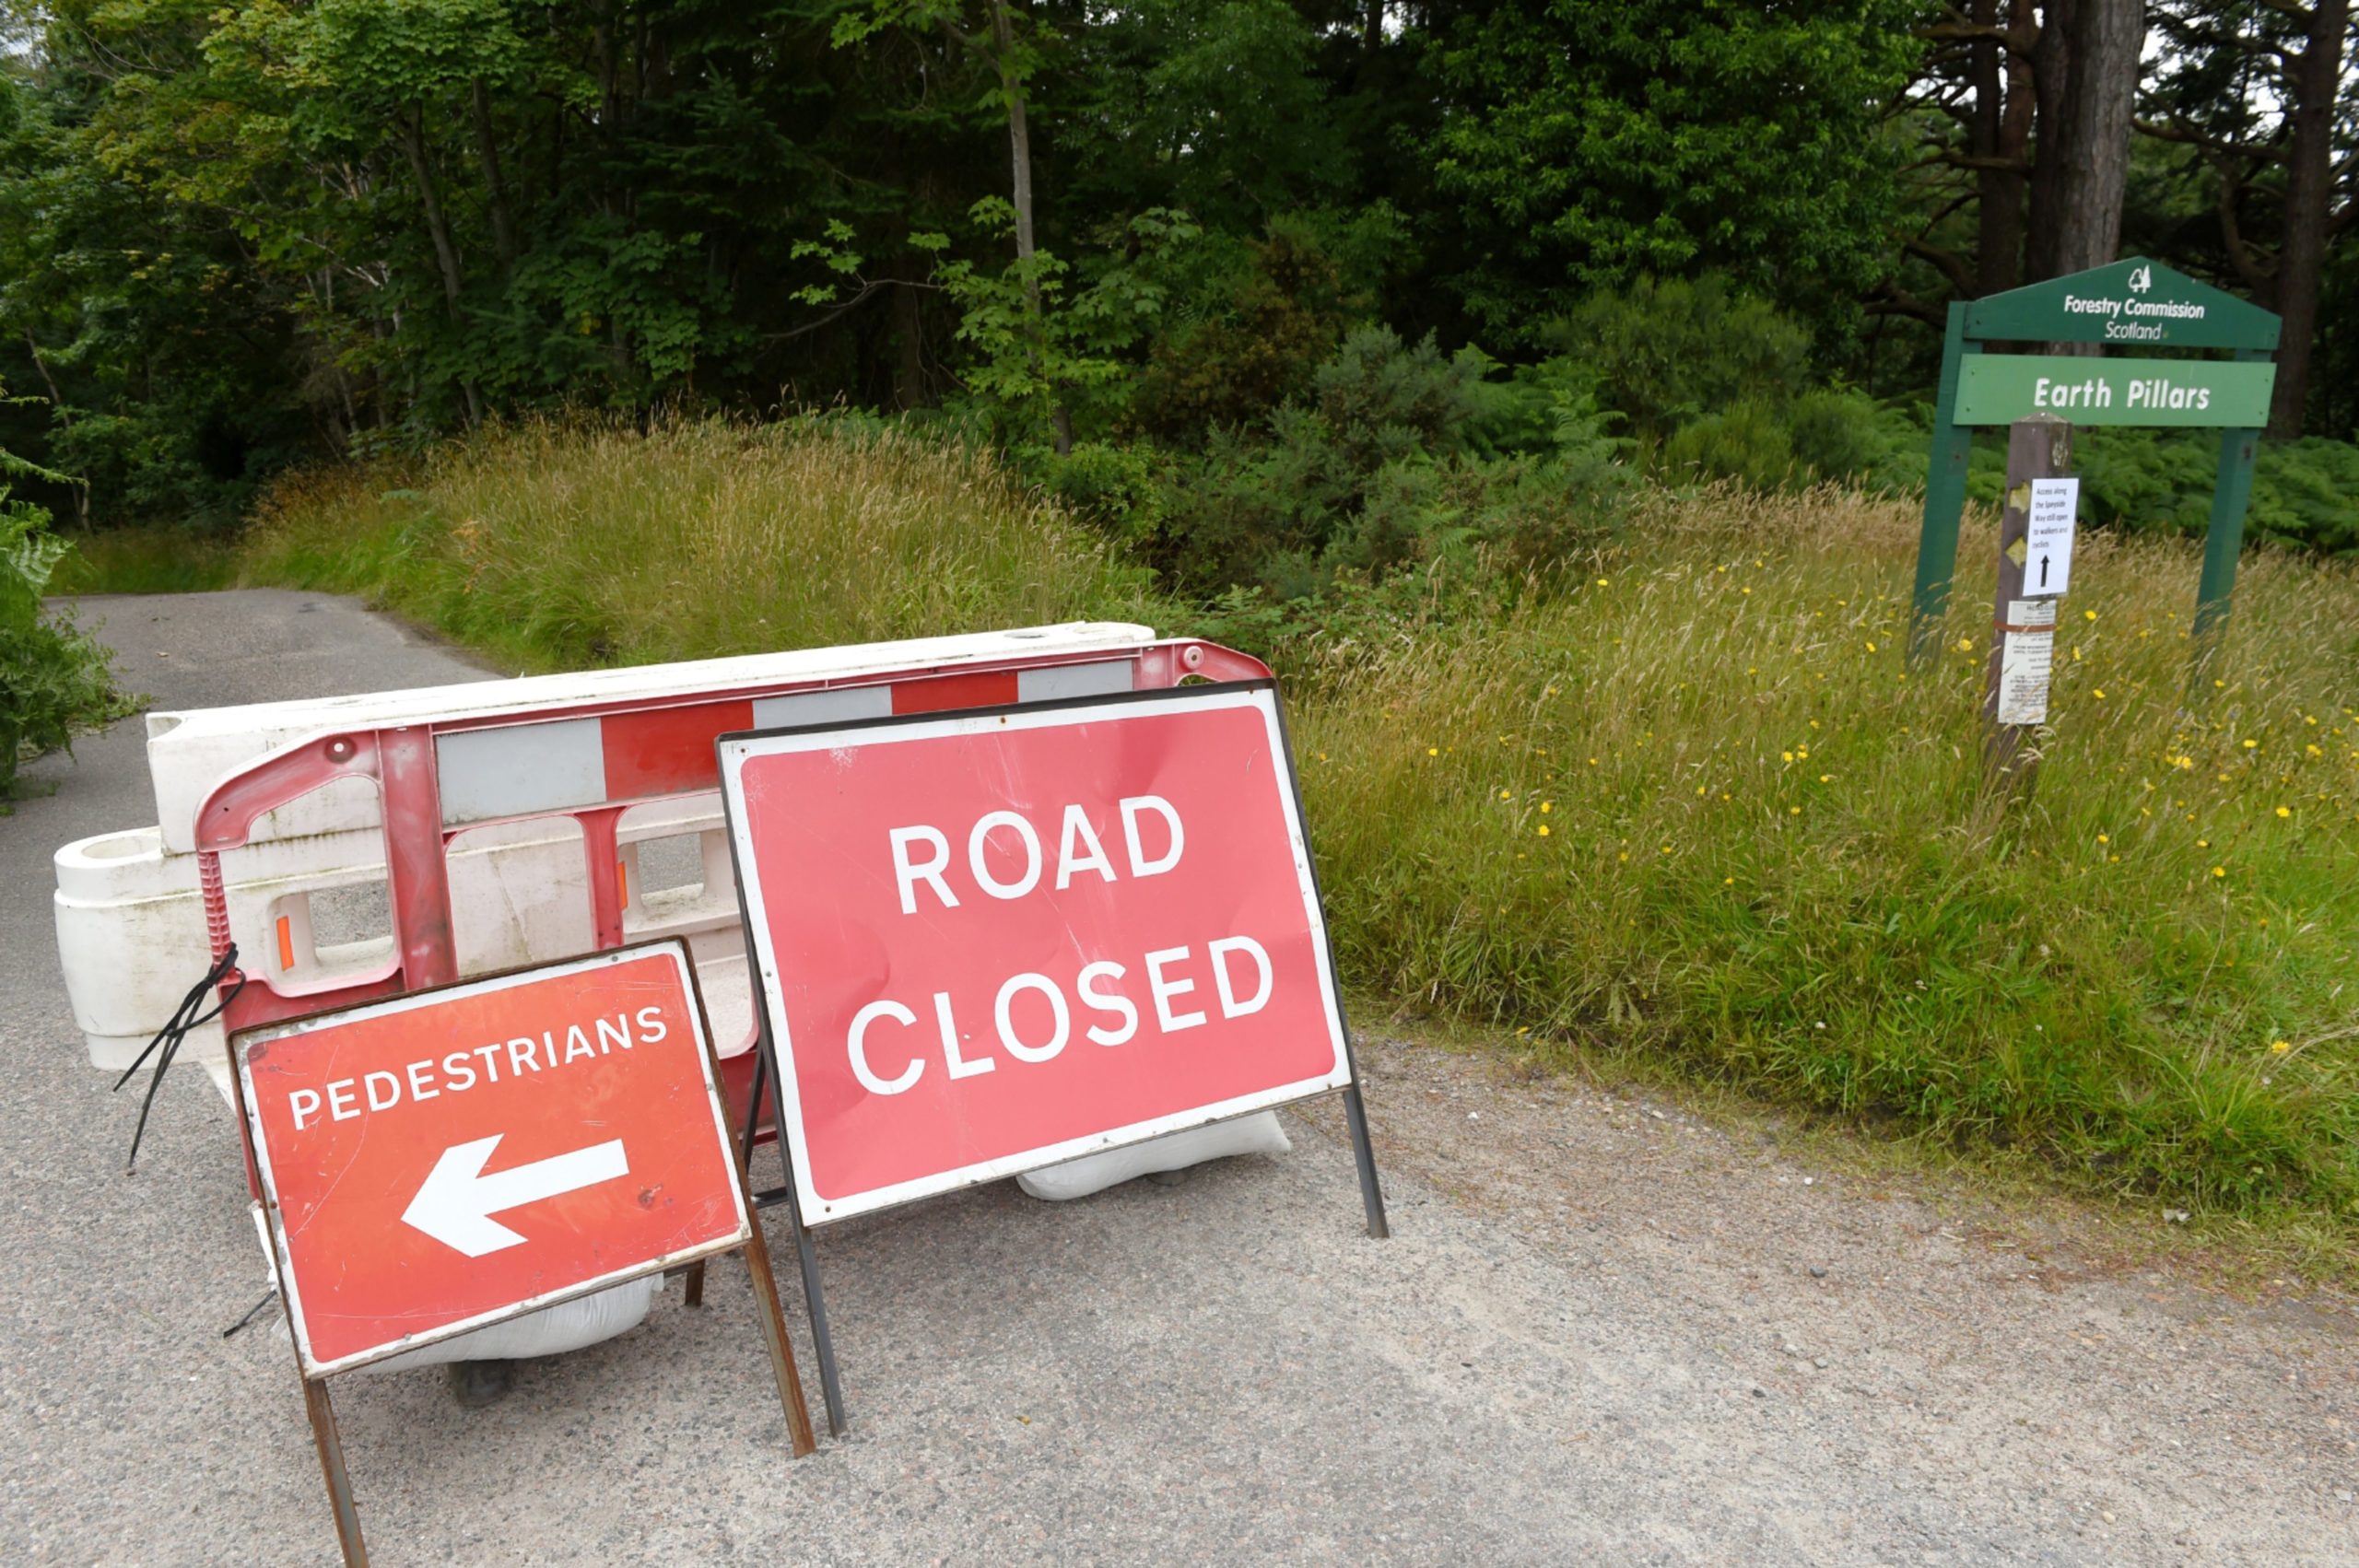 Ordiquish Road close to the Earth Pillars at Fochabers is to be closed for the next month due to a landslip undermining the roadway.